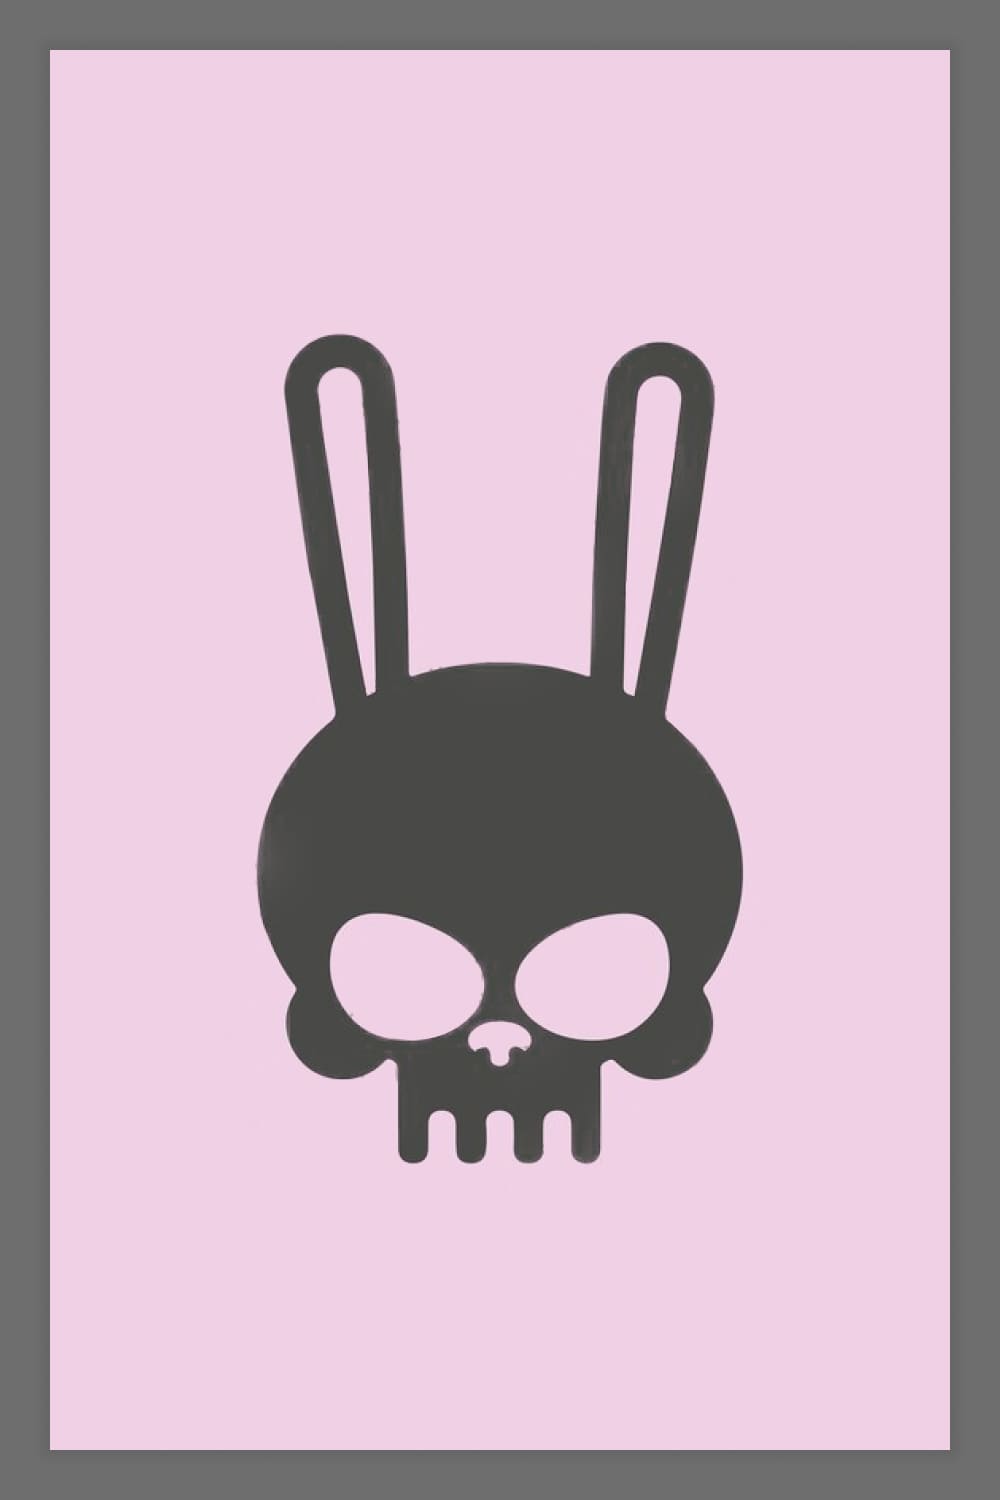 Skull with rabbit ears on a pink background.